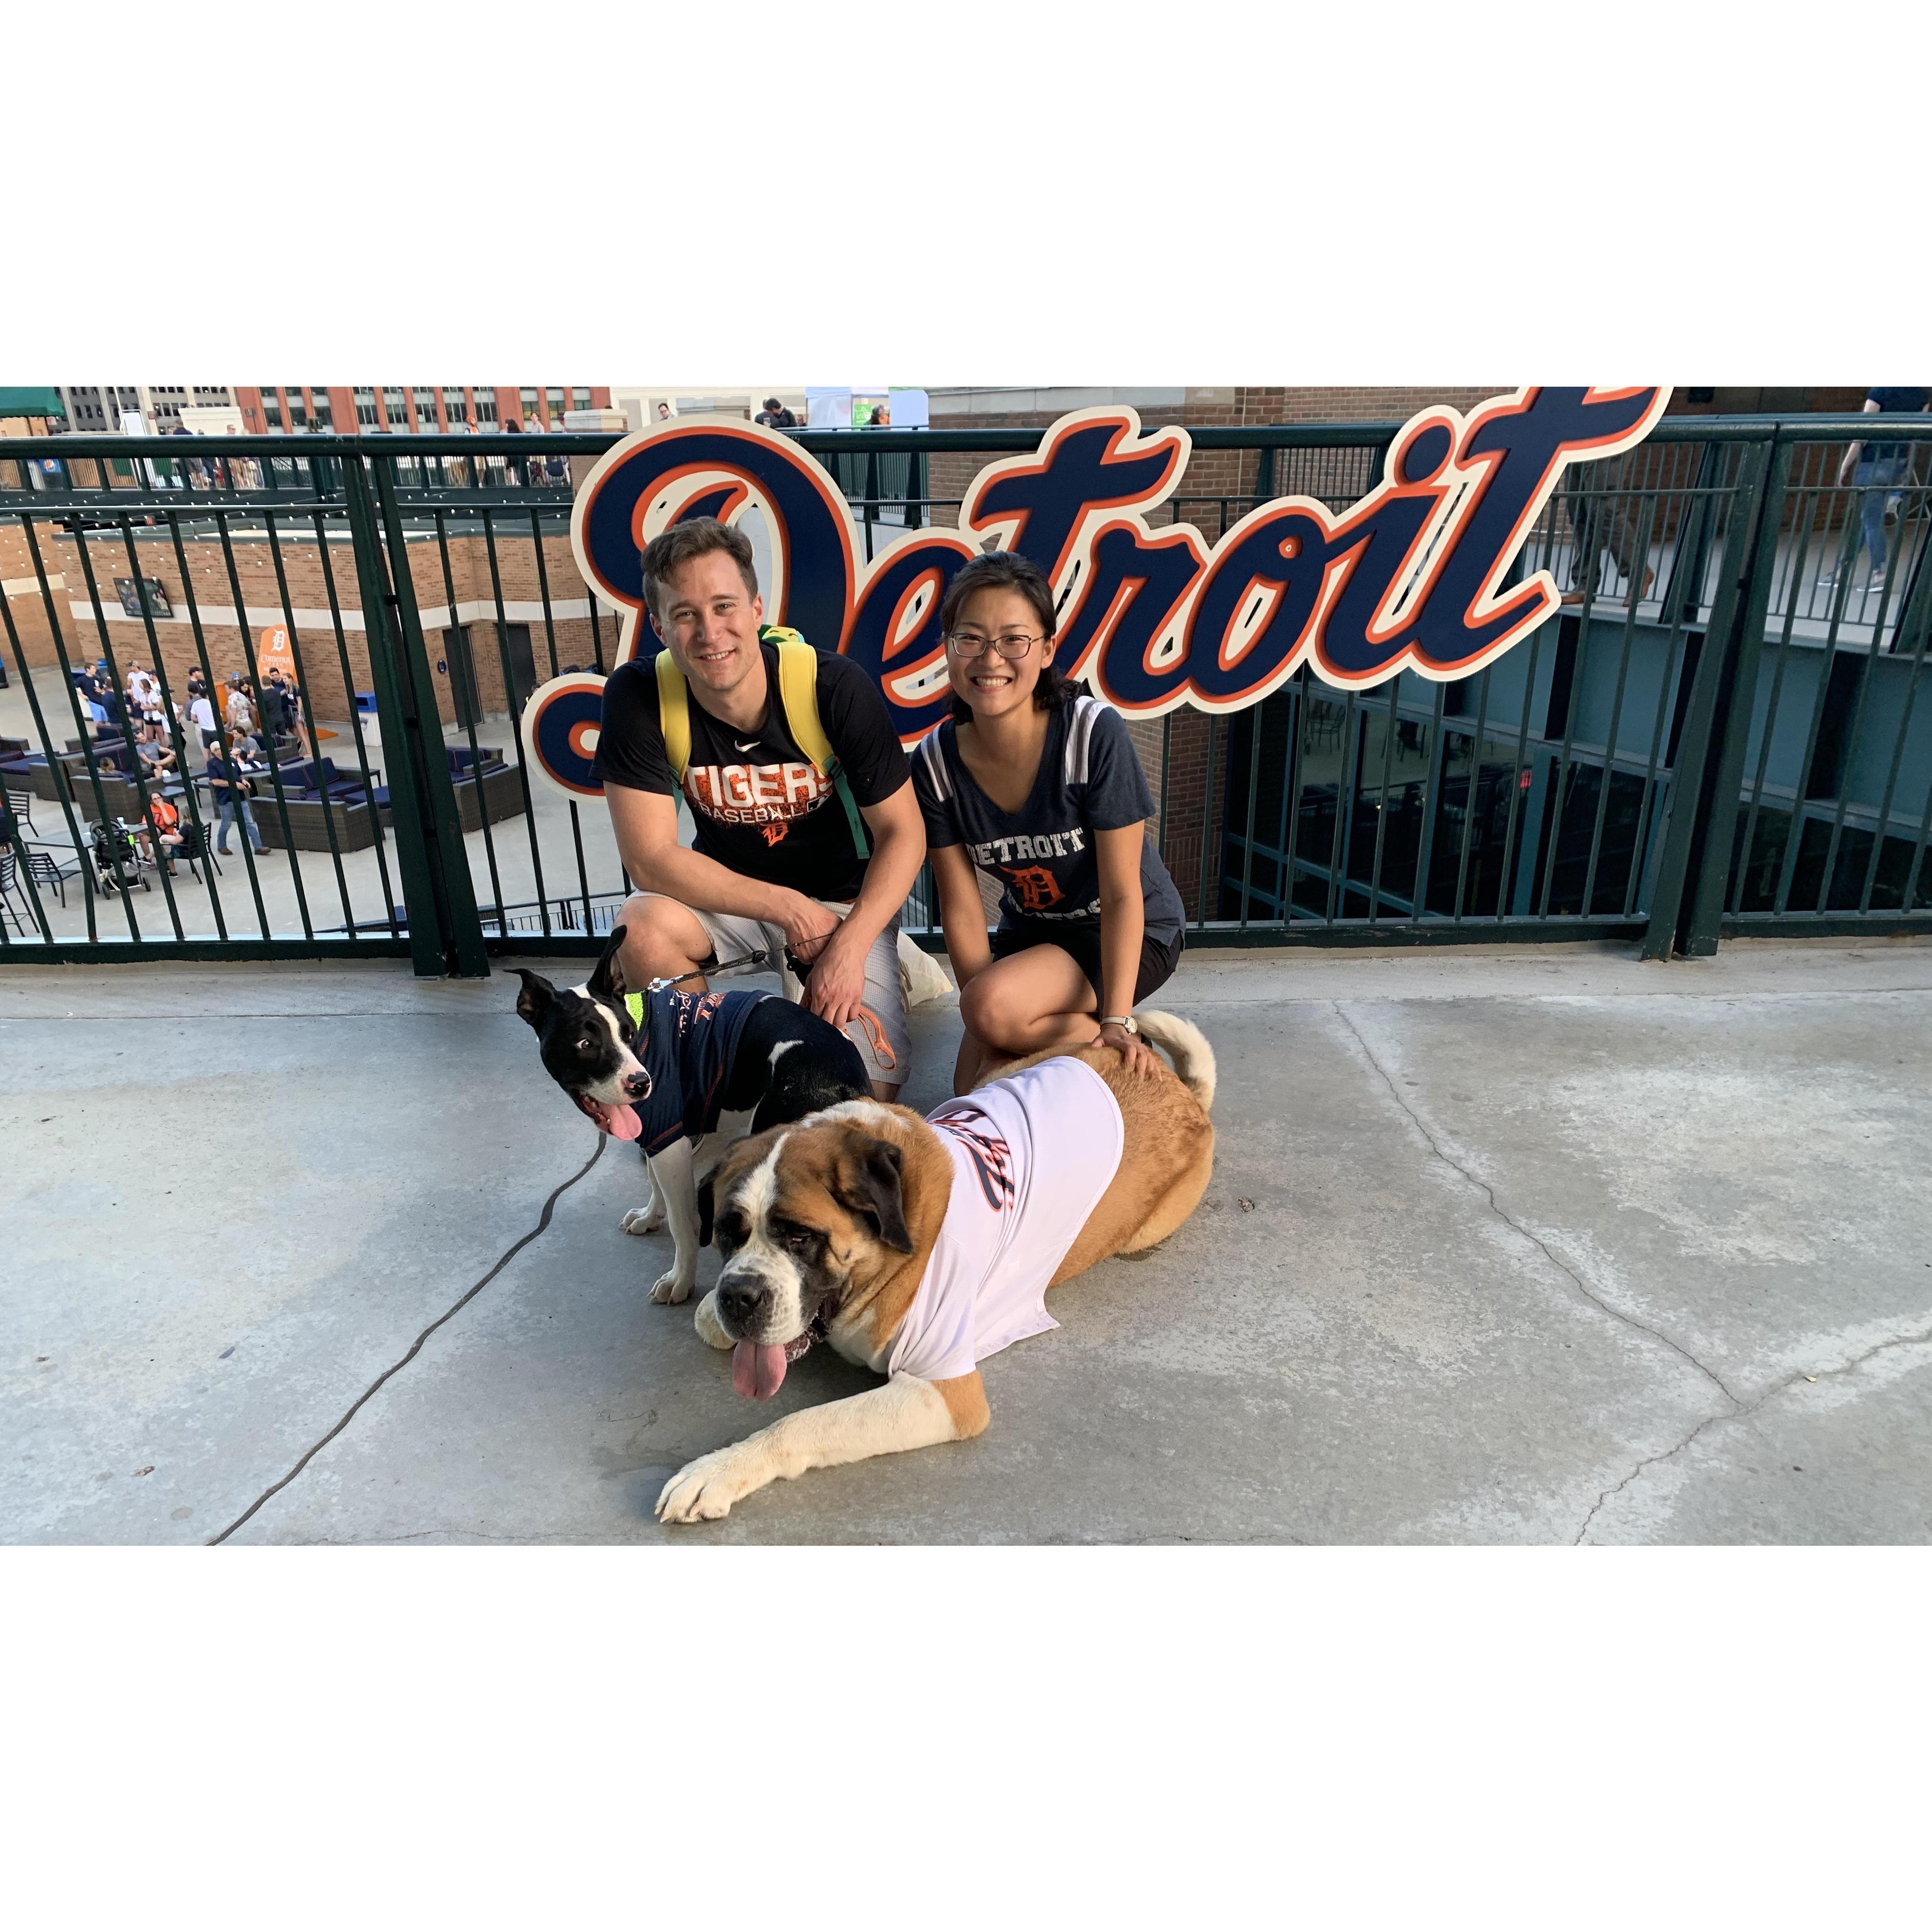 First *successful* attempt at sneaking the pups into the ballpark